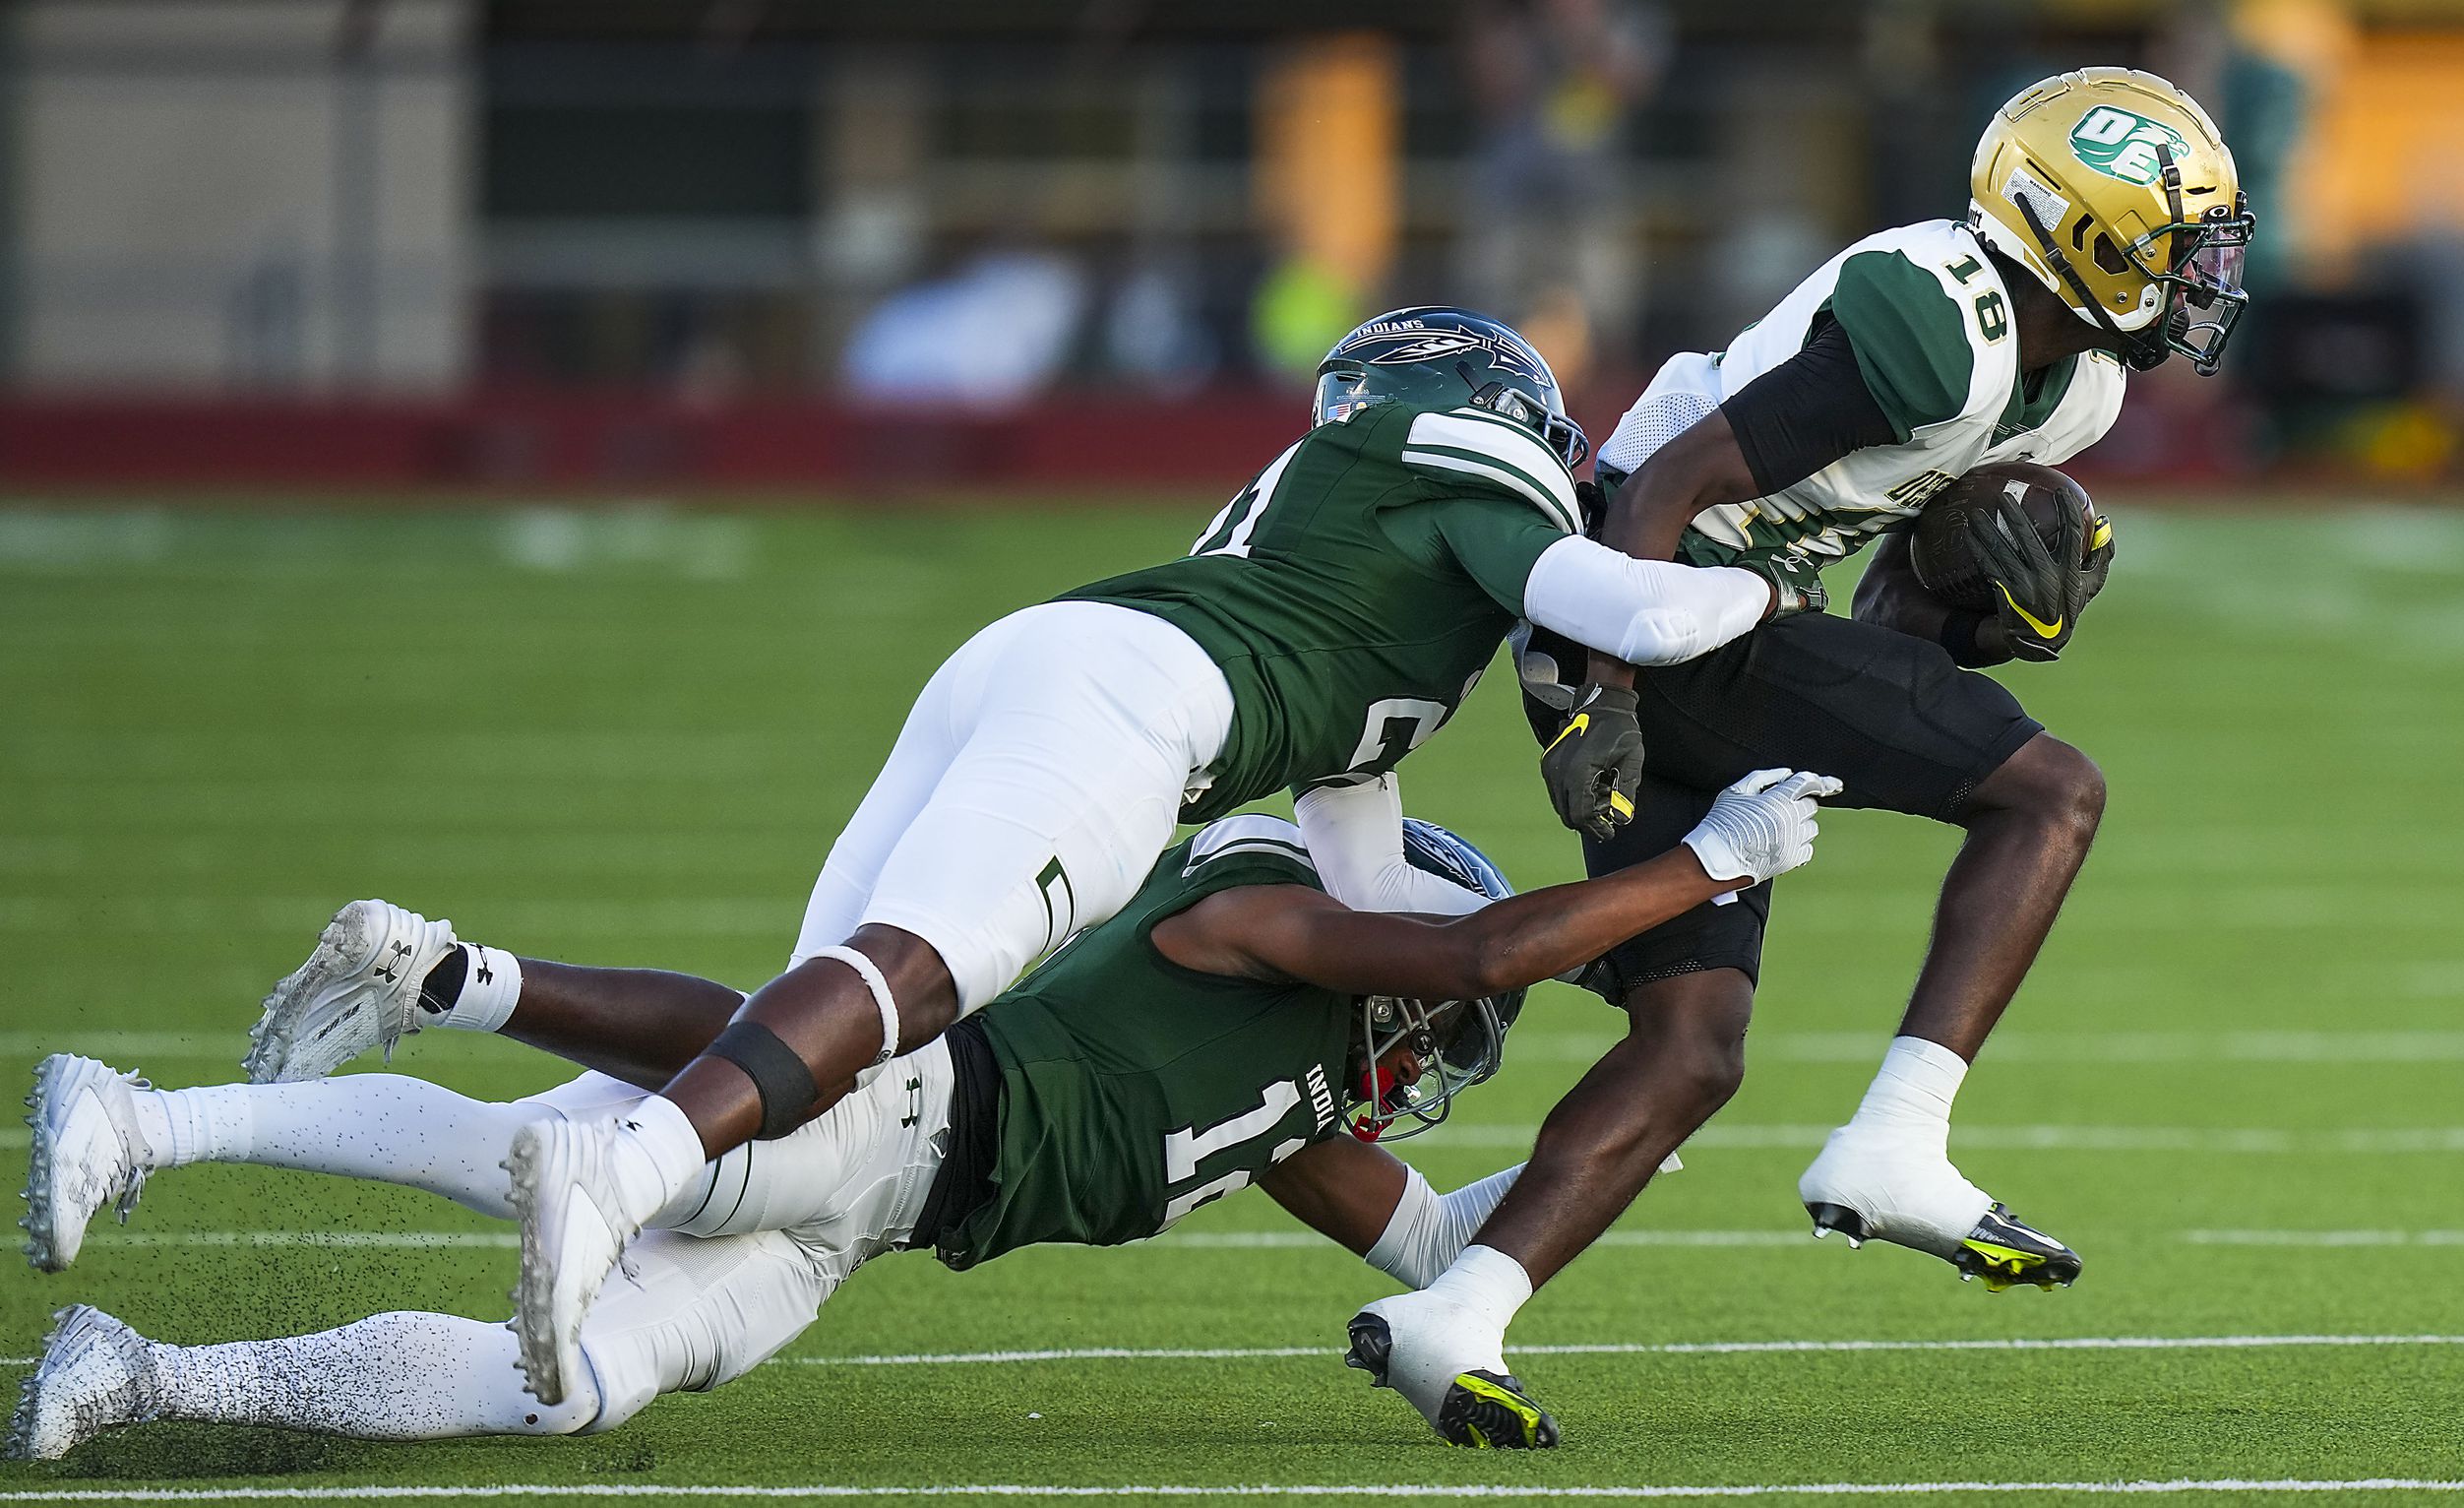 Take flight! See photos of DeSoto's close win against Waxahachie